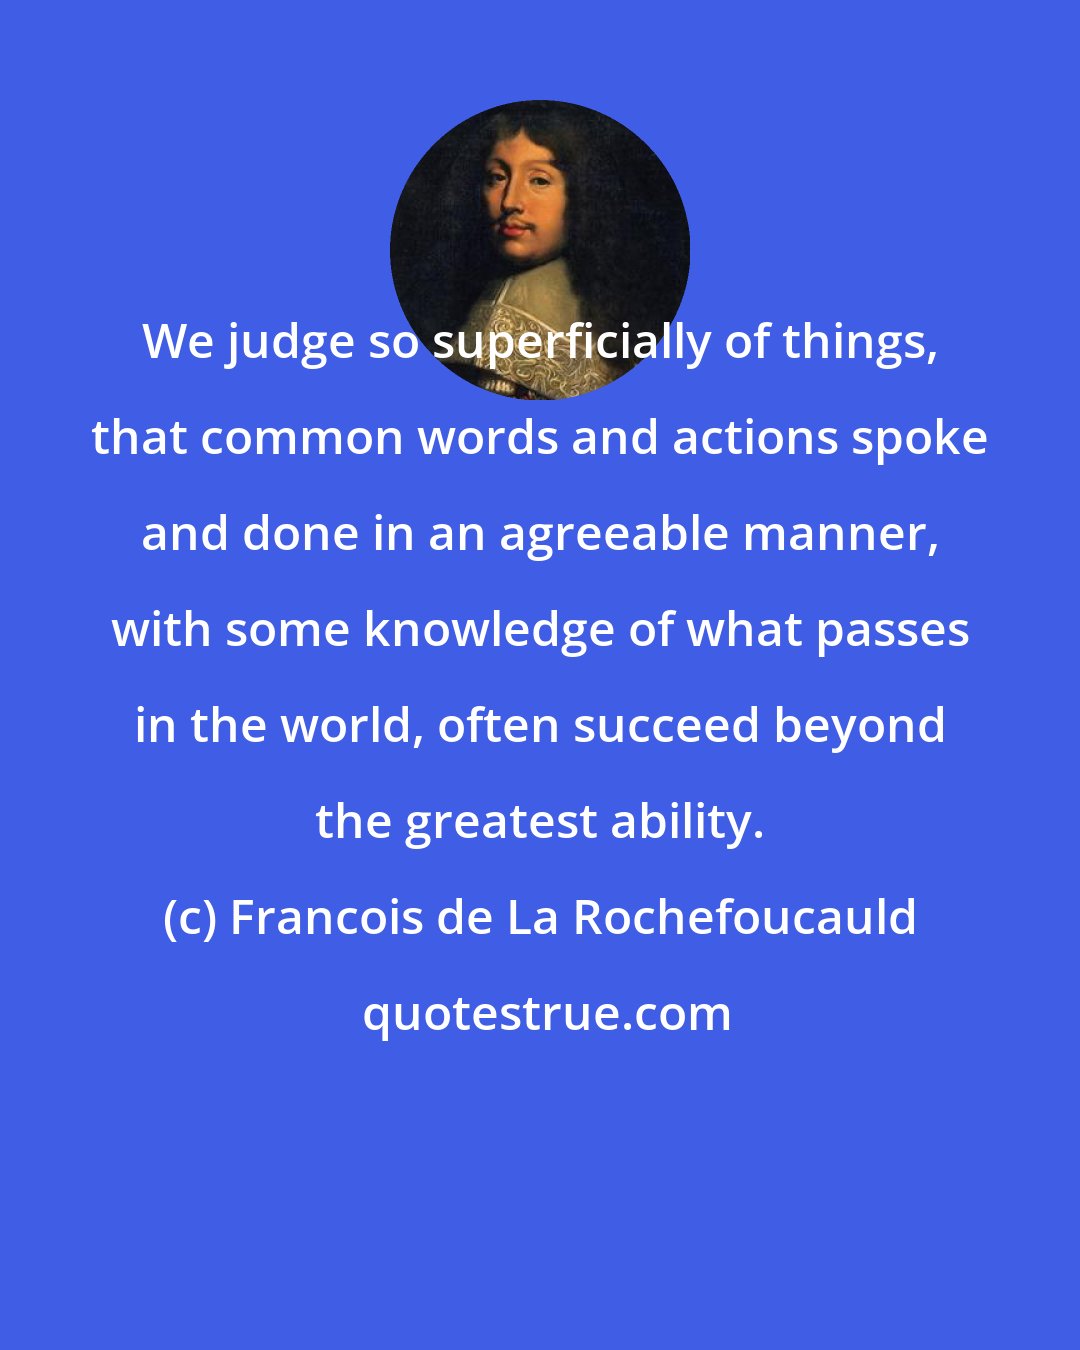 Francois de La Rochefoucauld: We judge so superficially of things, that common words and actions spoke and done in an agreeable manner, with some knowledge of what passes in the world, often succeed beyond the greatest ability.